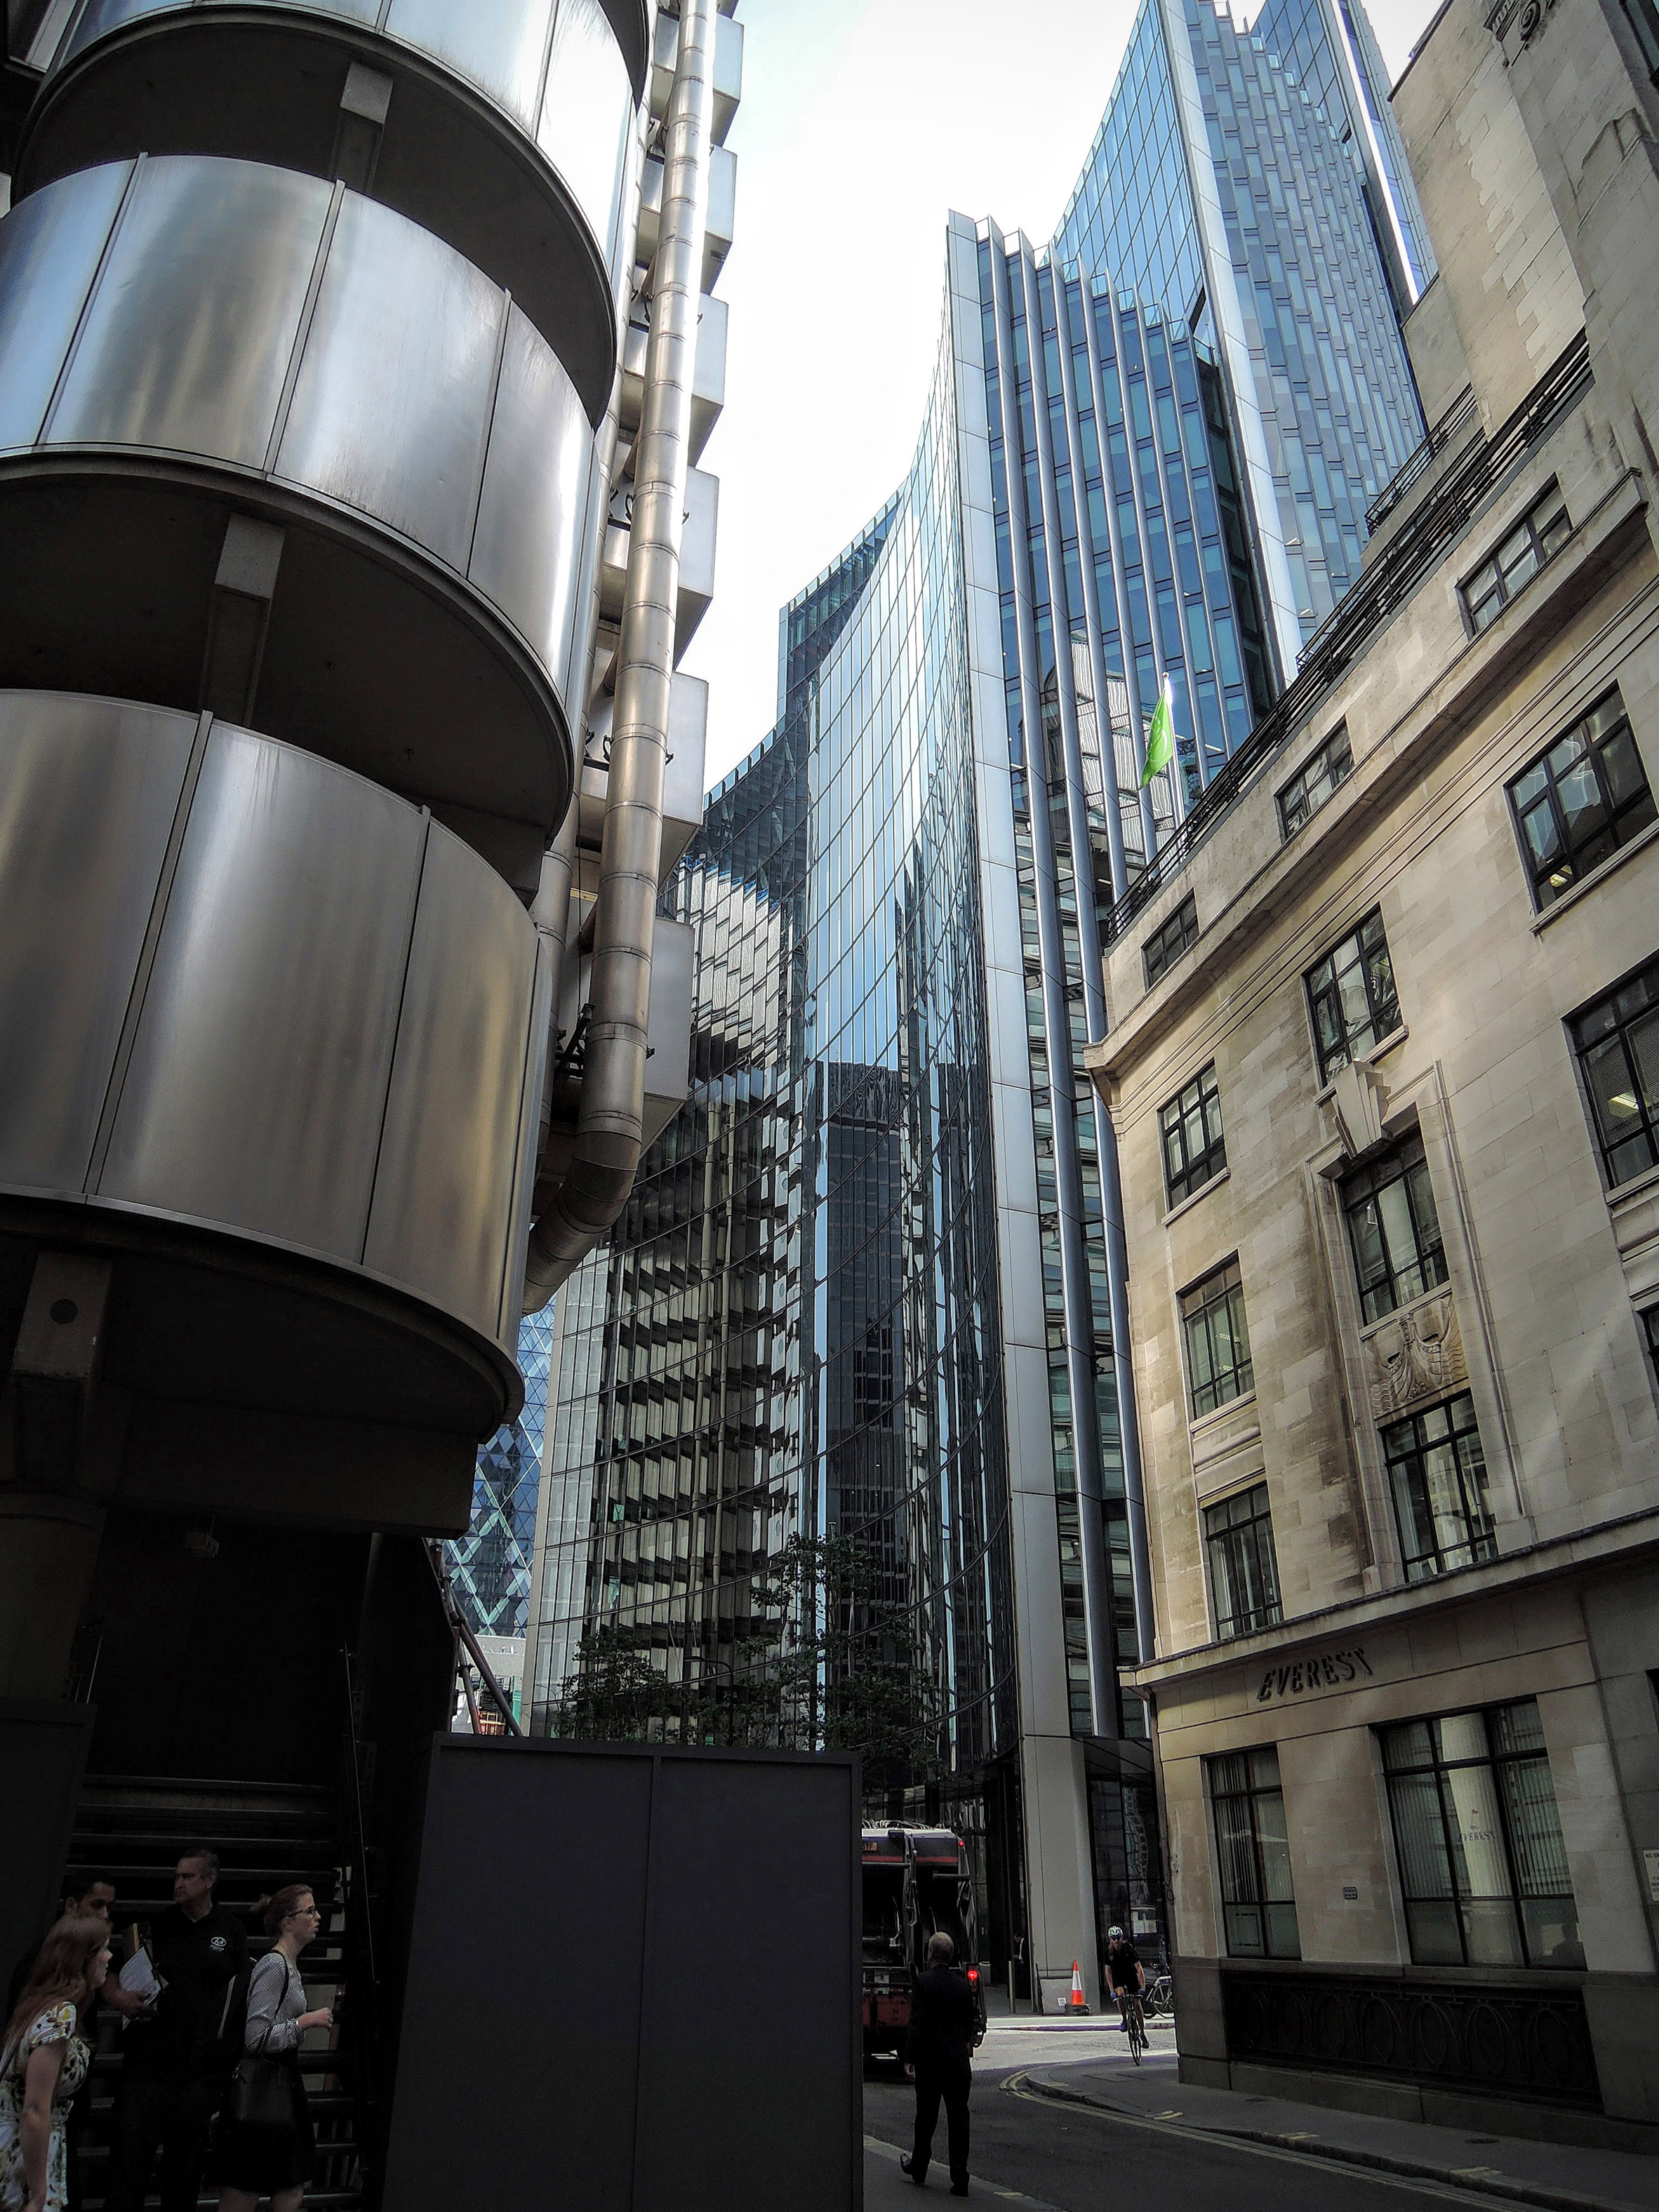 City of London introduces wind tunnel guidance for skyscrapers